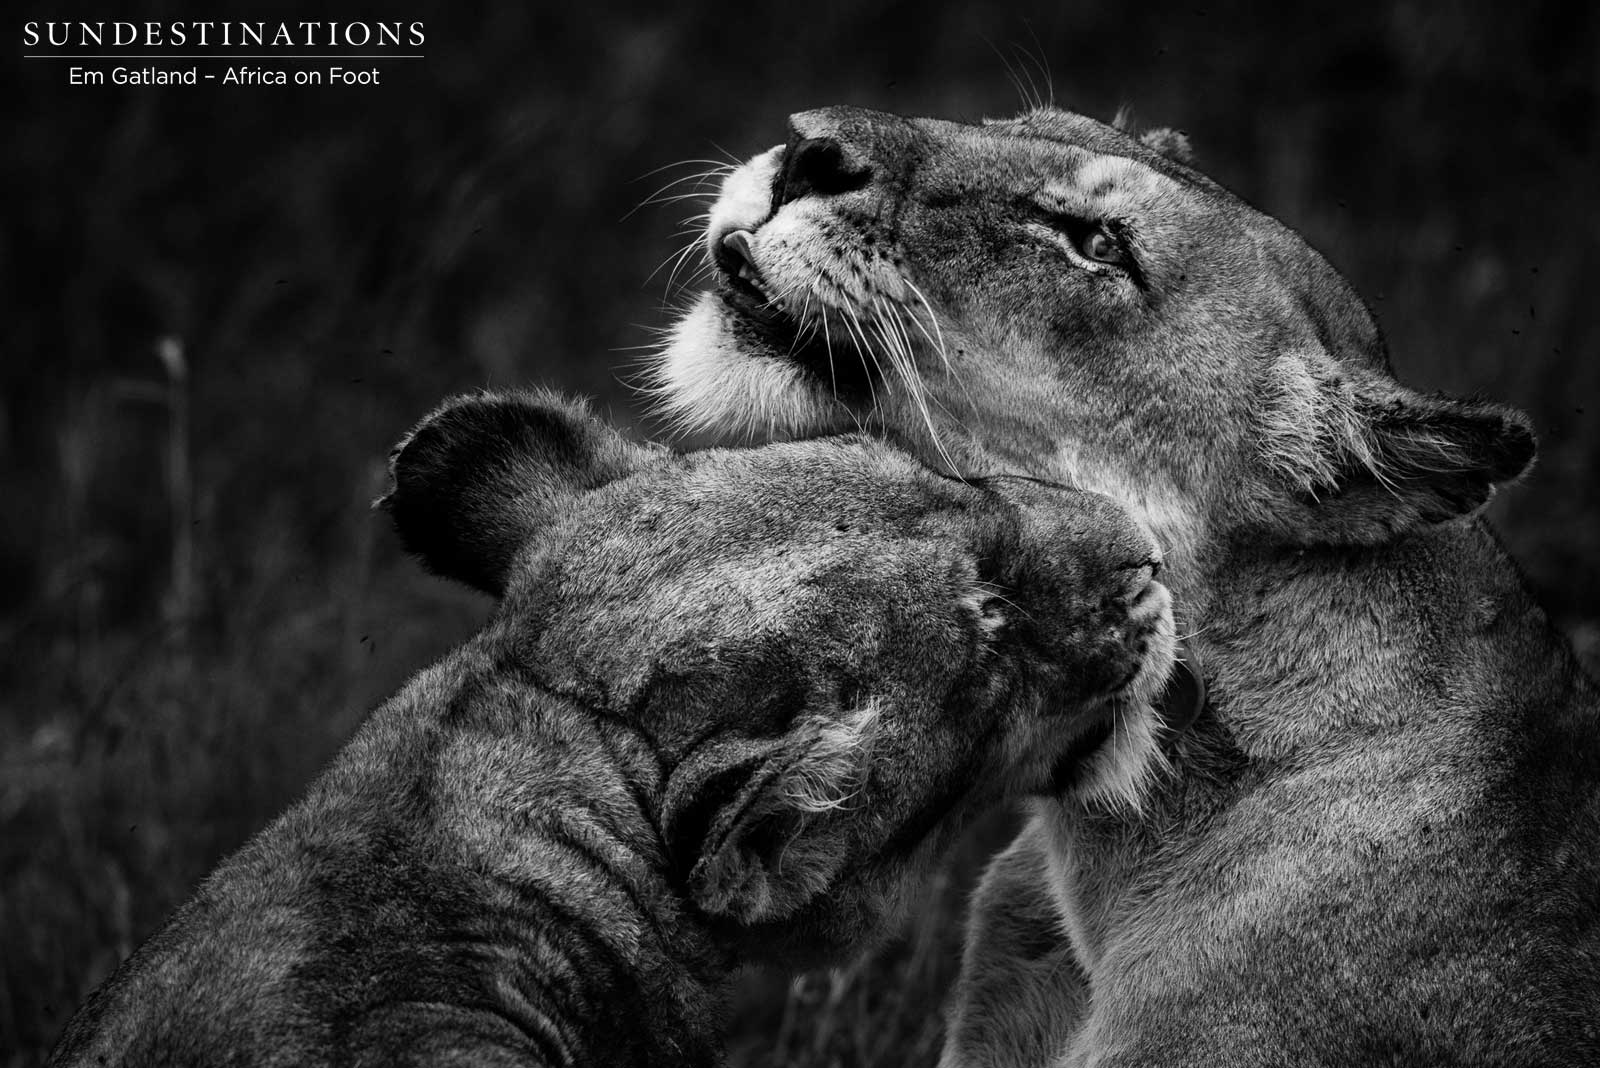 The sisterly bond between the Ross Breakaway lionesses, captured in black and white